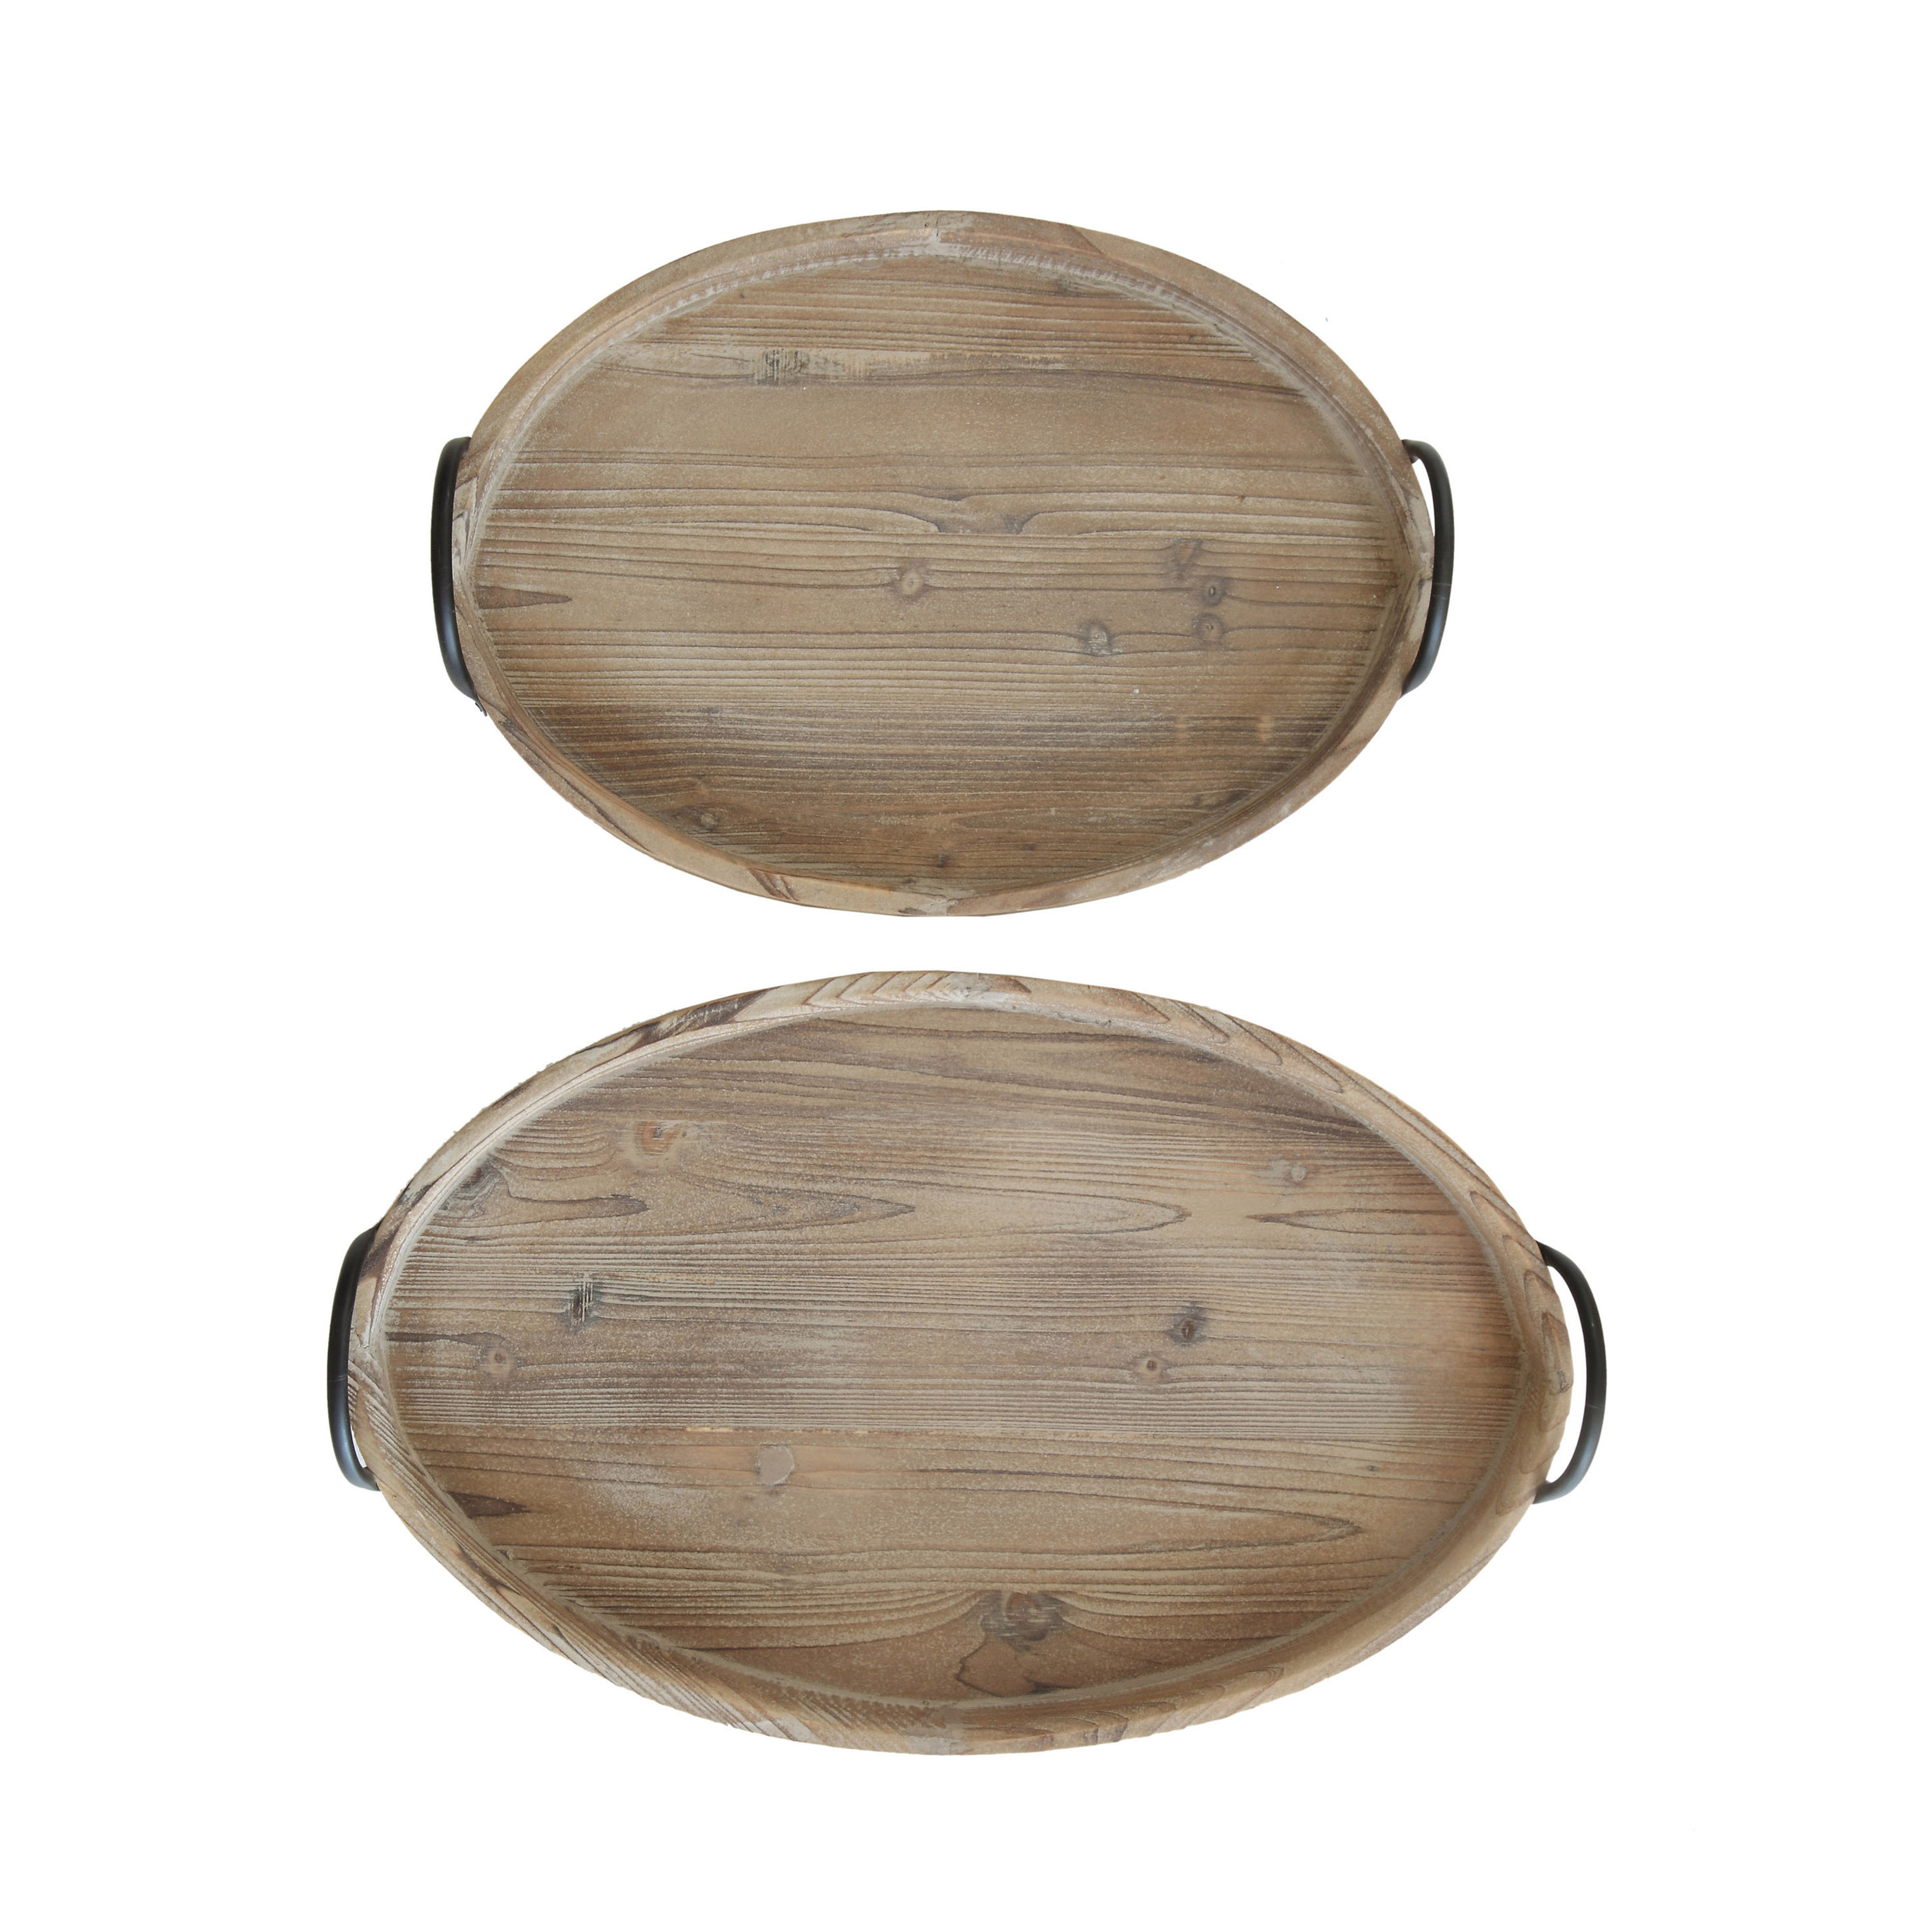 Round Decorative Wood Trays with Metal Handles (Set of 2 Sizes) - Nomad Home